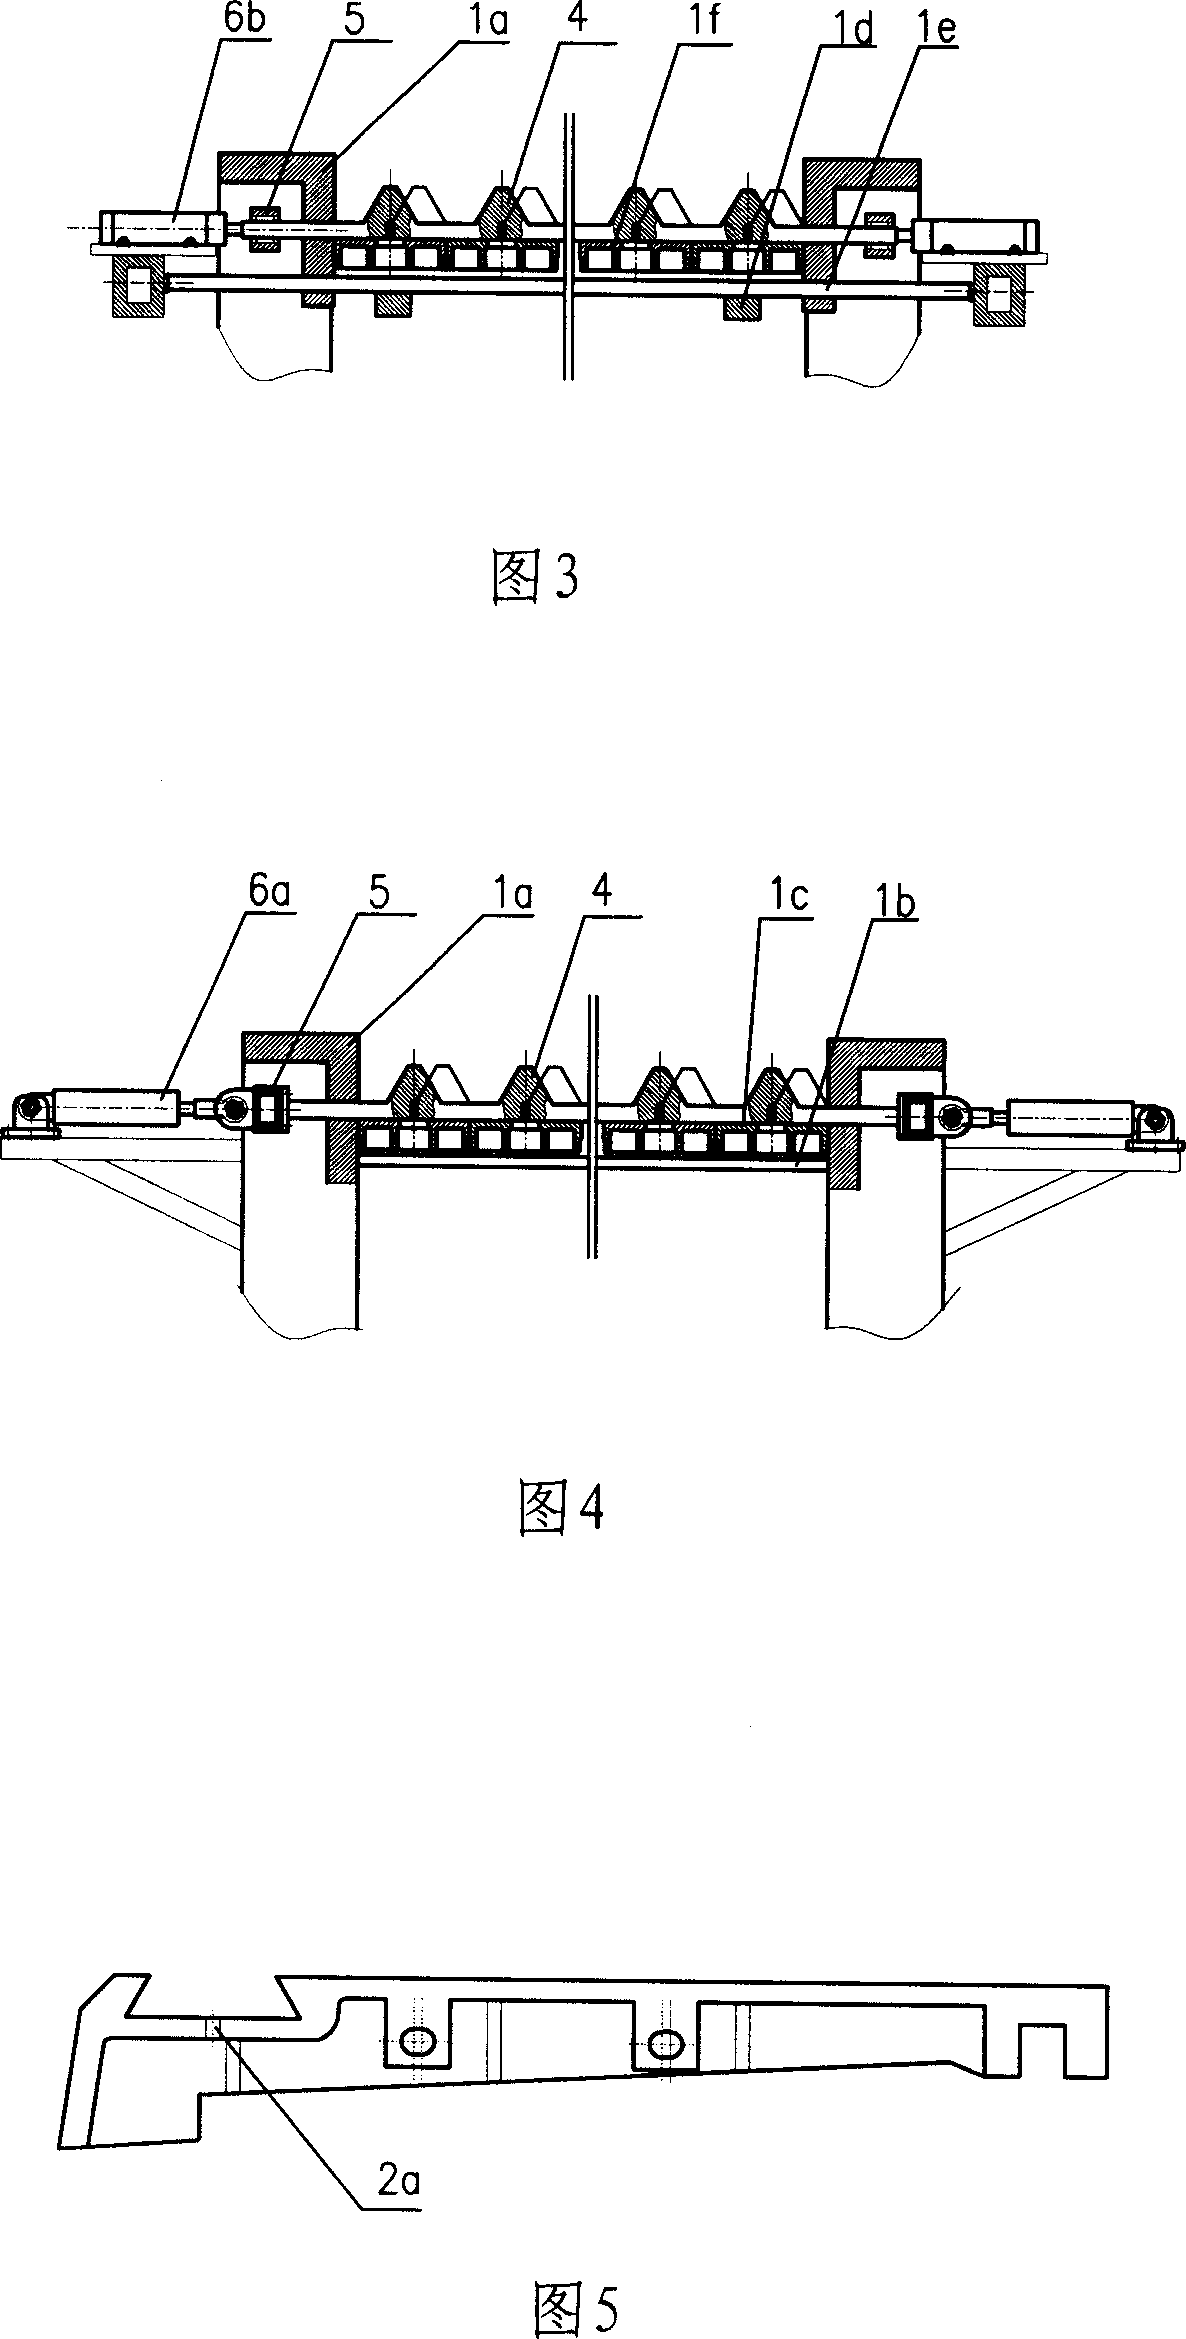 Lateral motion reciprocating fire grate system